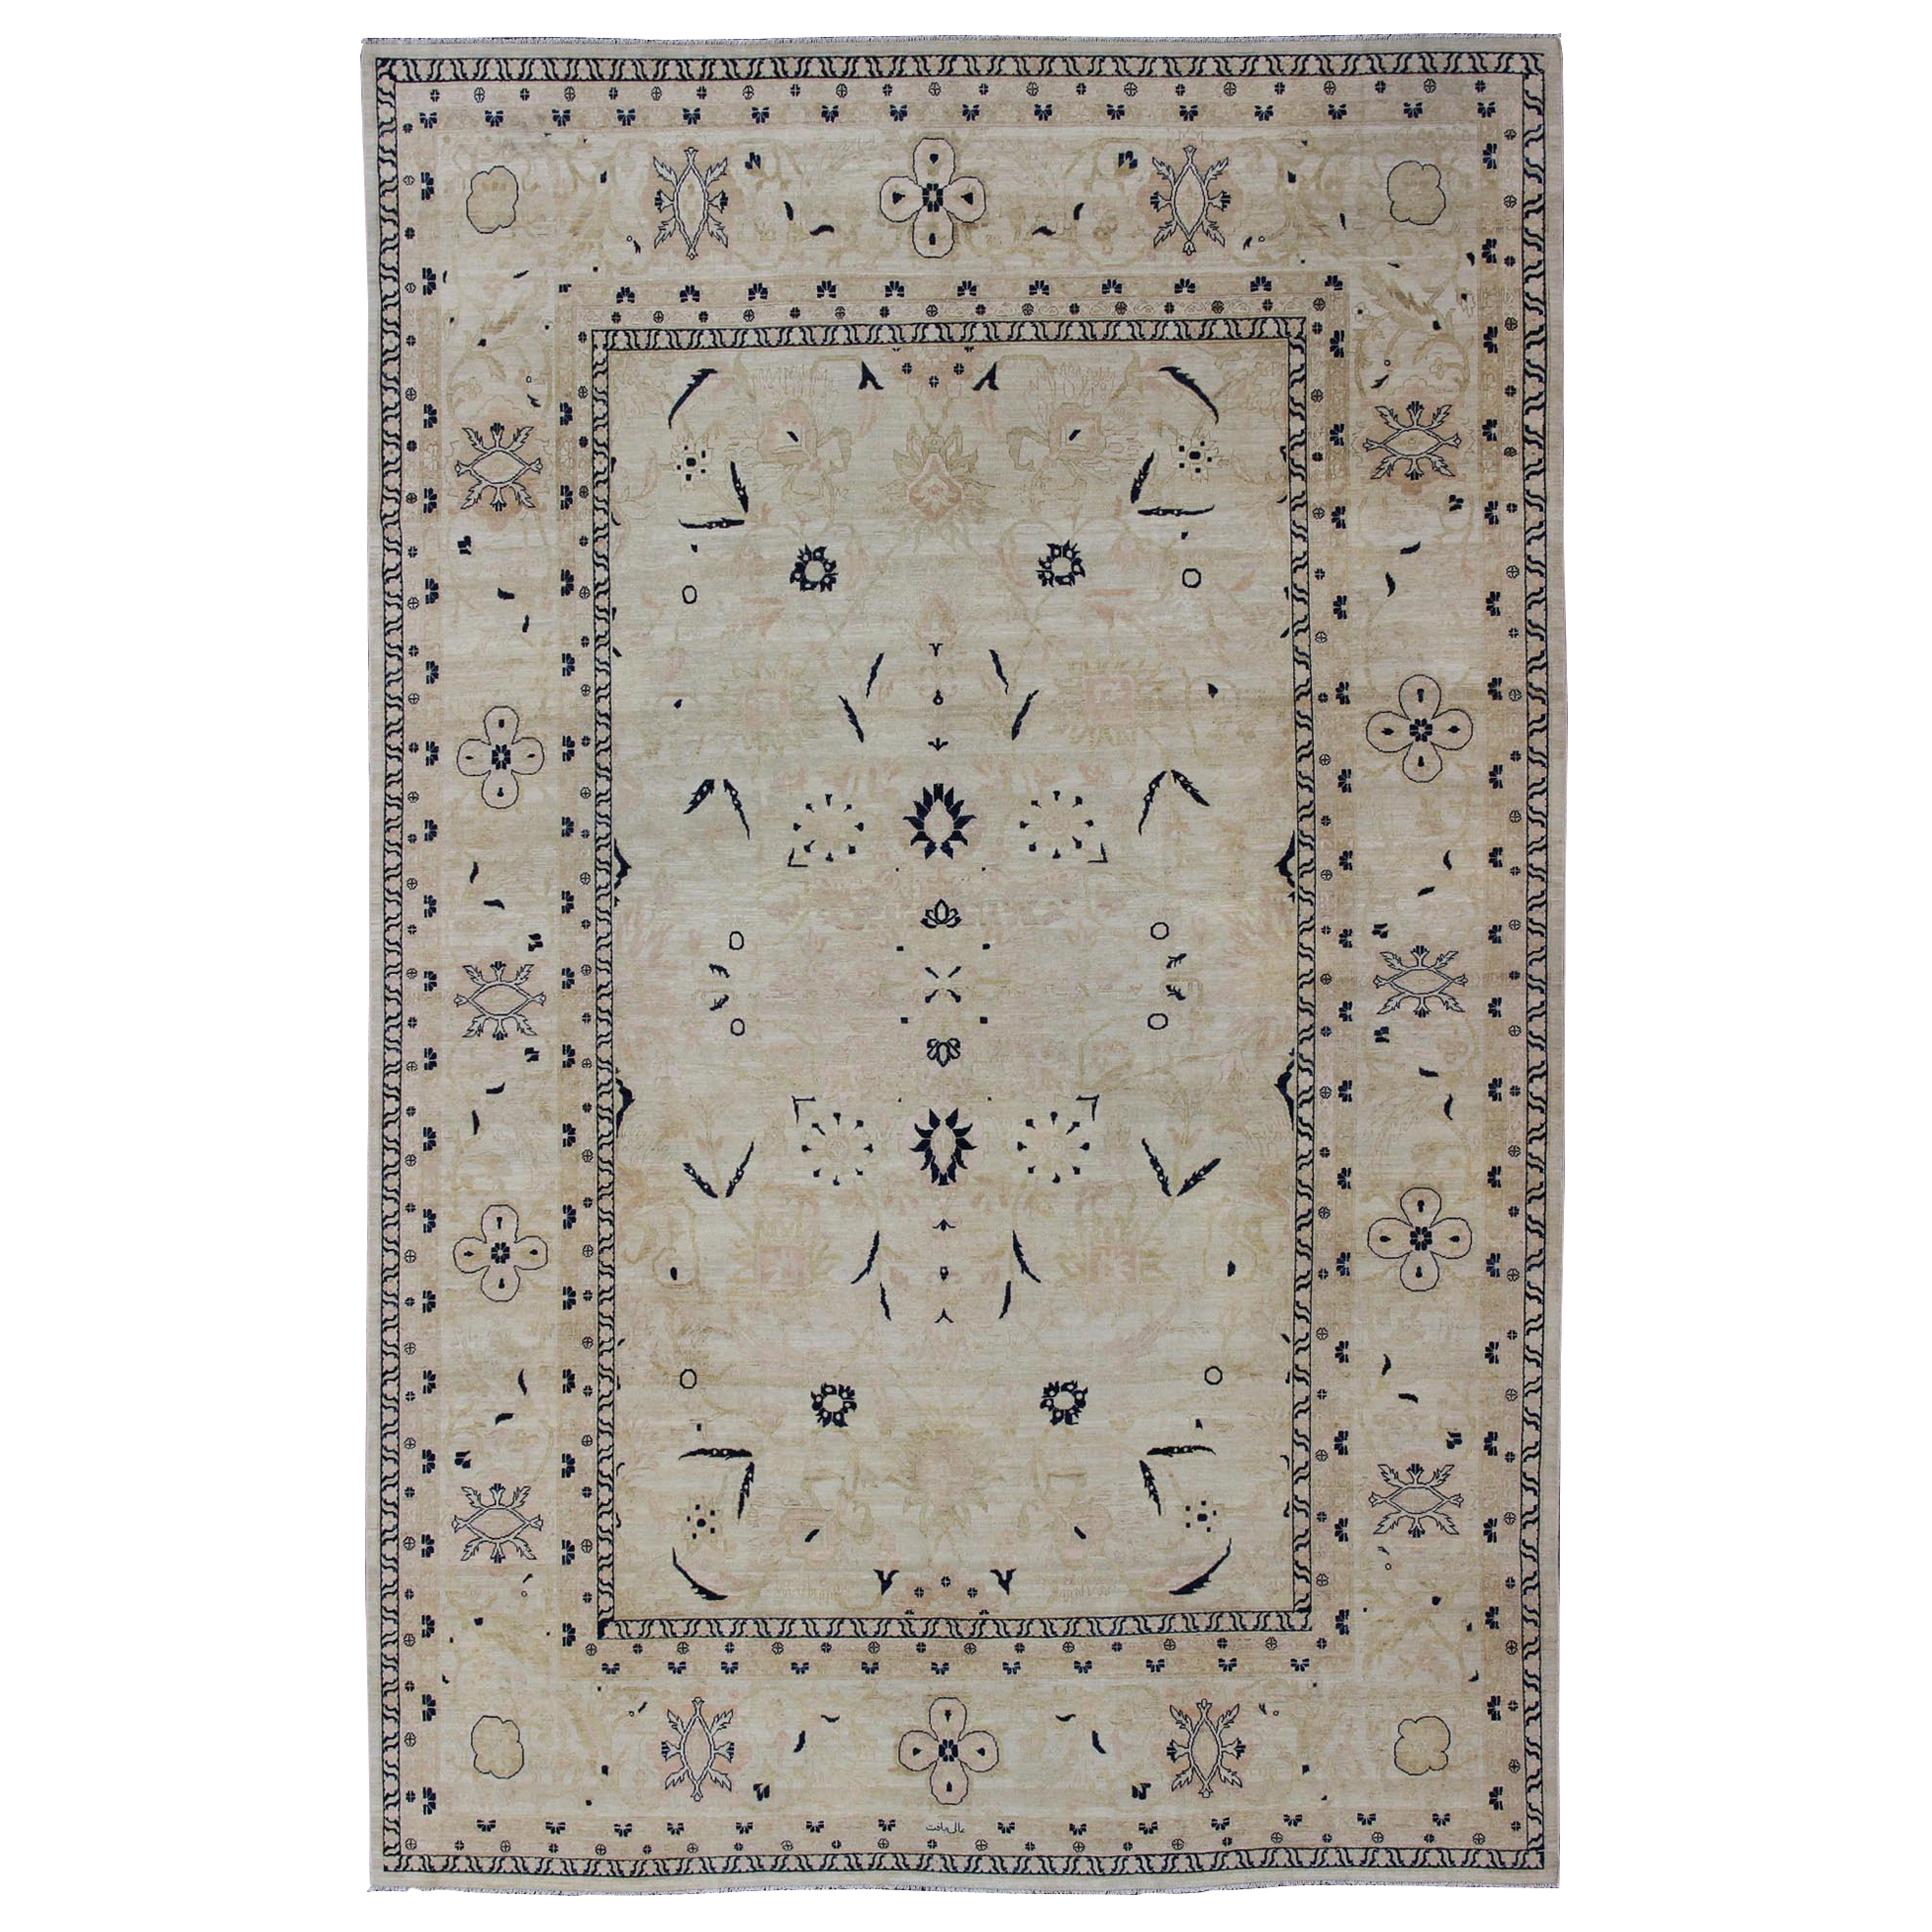 Afghan All-Over Tabriz Rug in Blue, Cream and light Butter Color